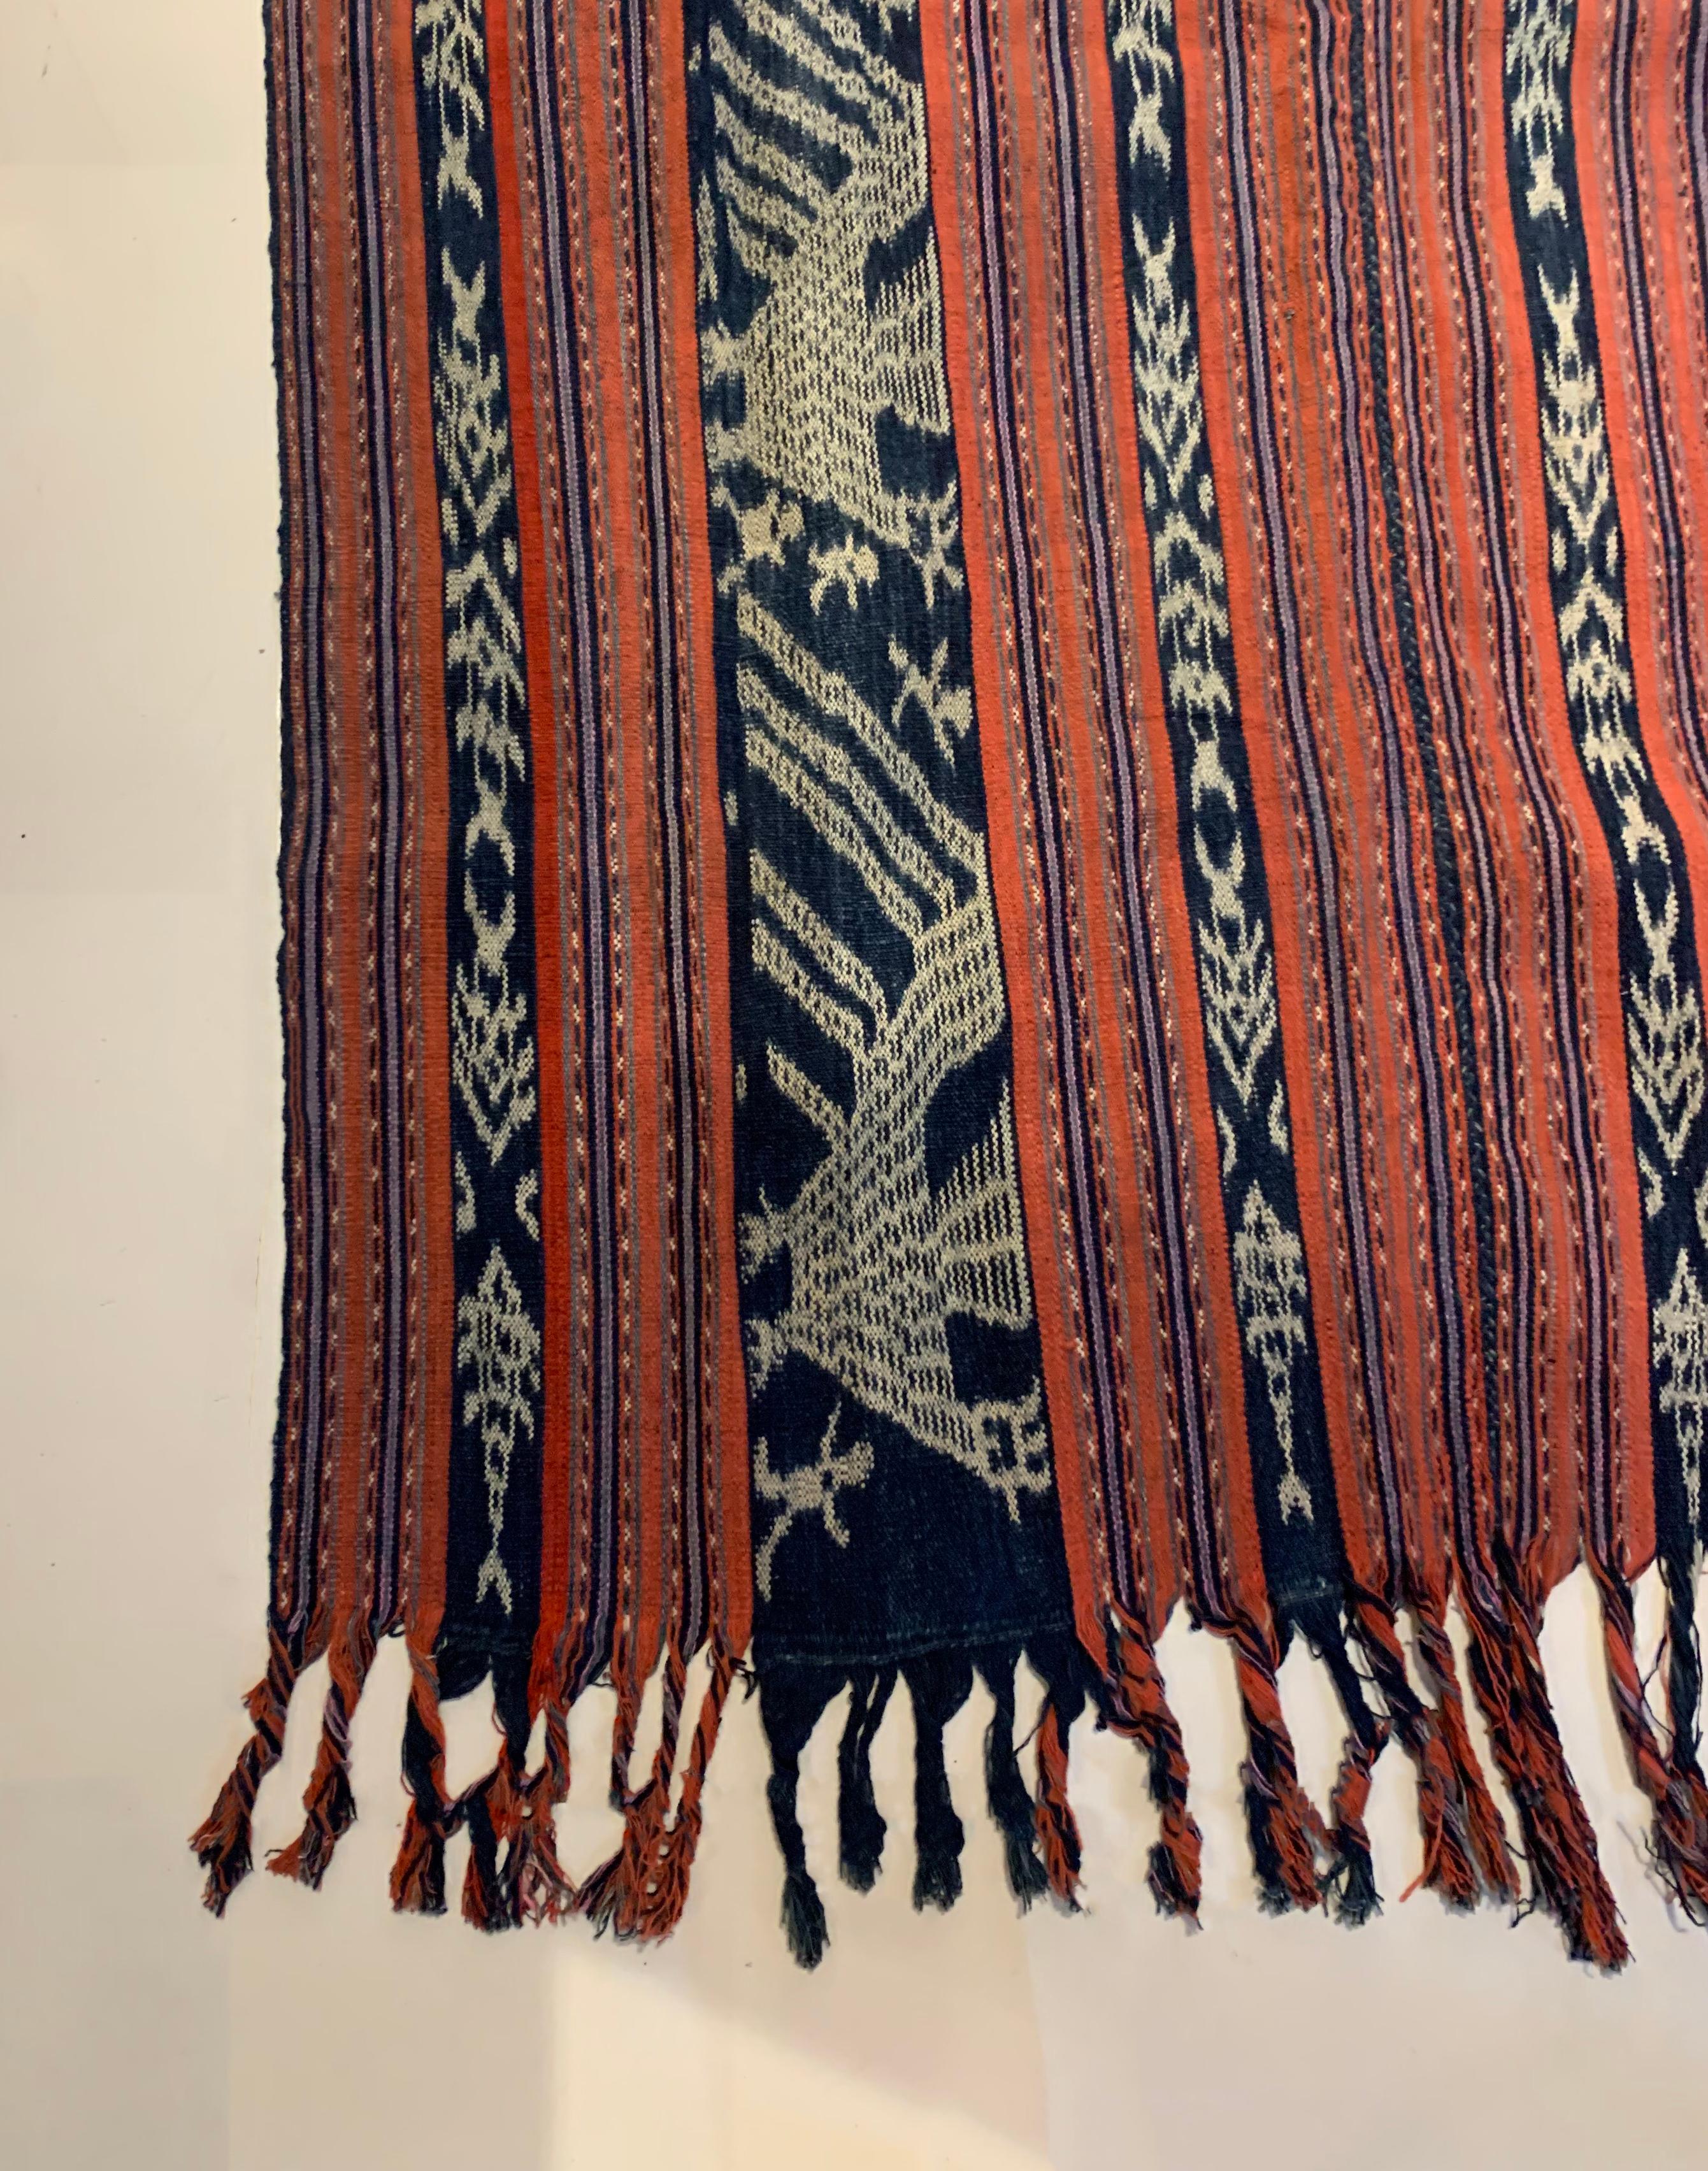 An wonderful example of a west timor ikat textile. It is hand-woven using naturally dyed yarns via a method passed on through generations. It features a stunning array of distinct tribal patterns and bright colours. The outter bands feature chicken